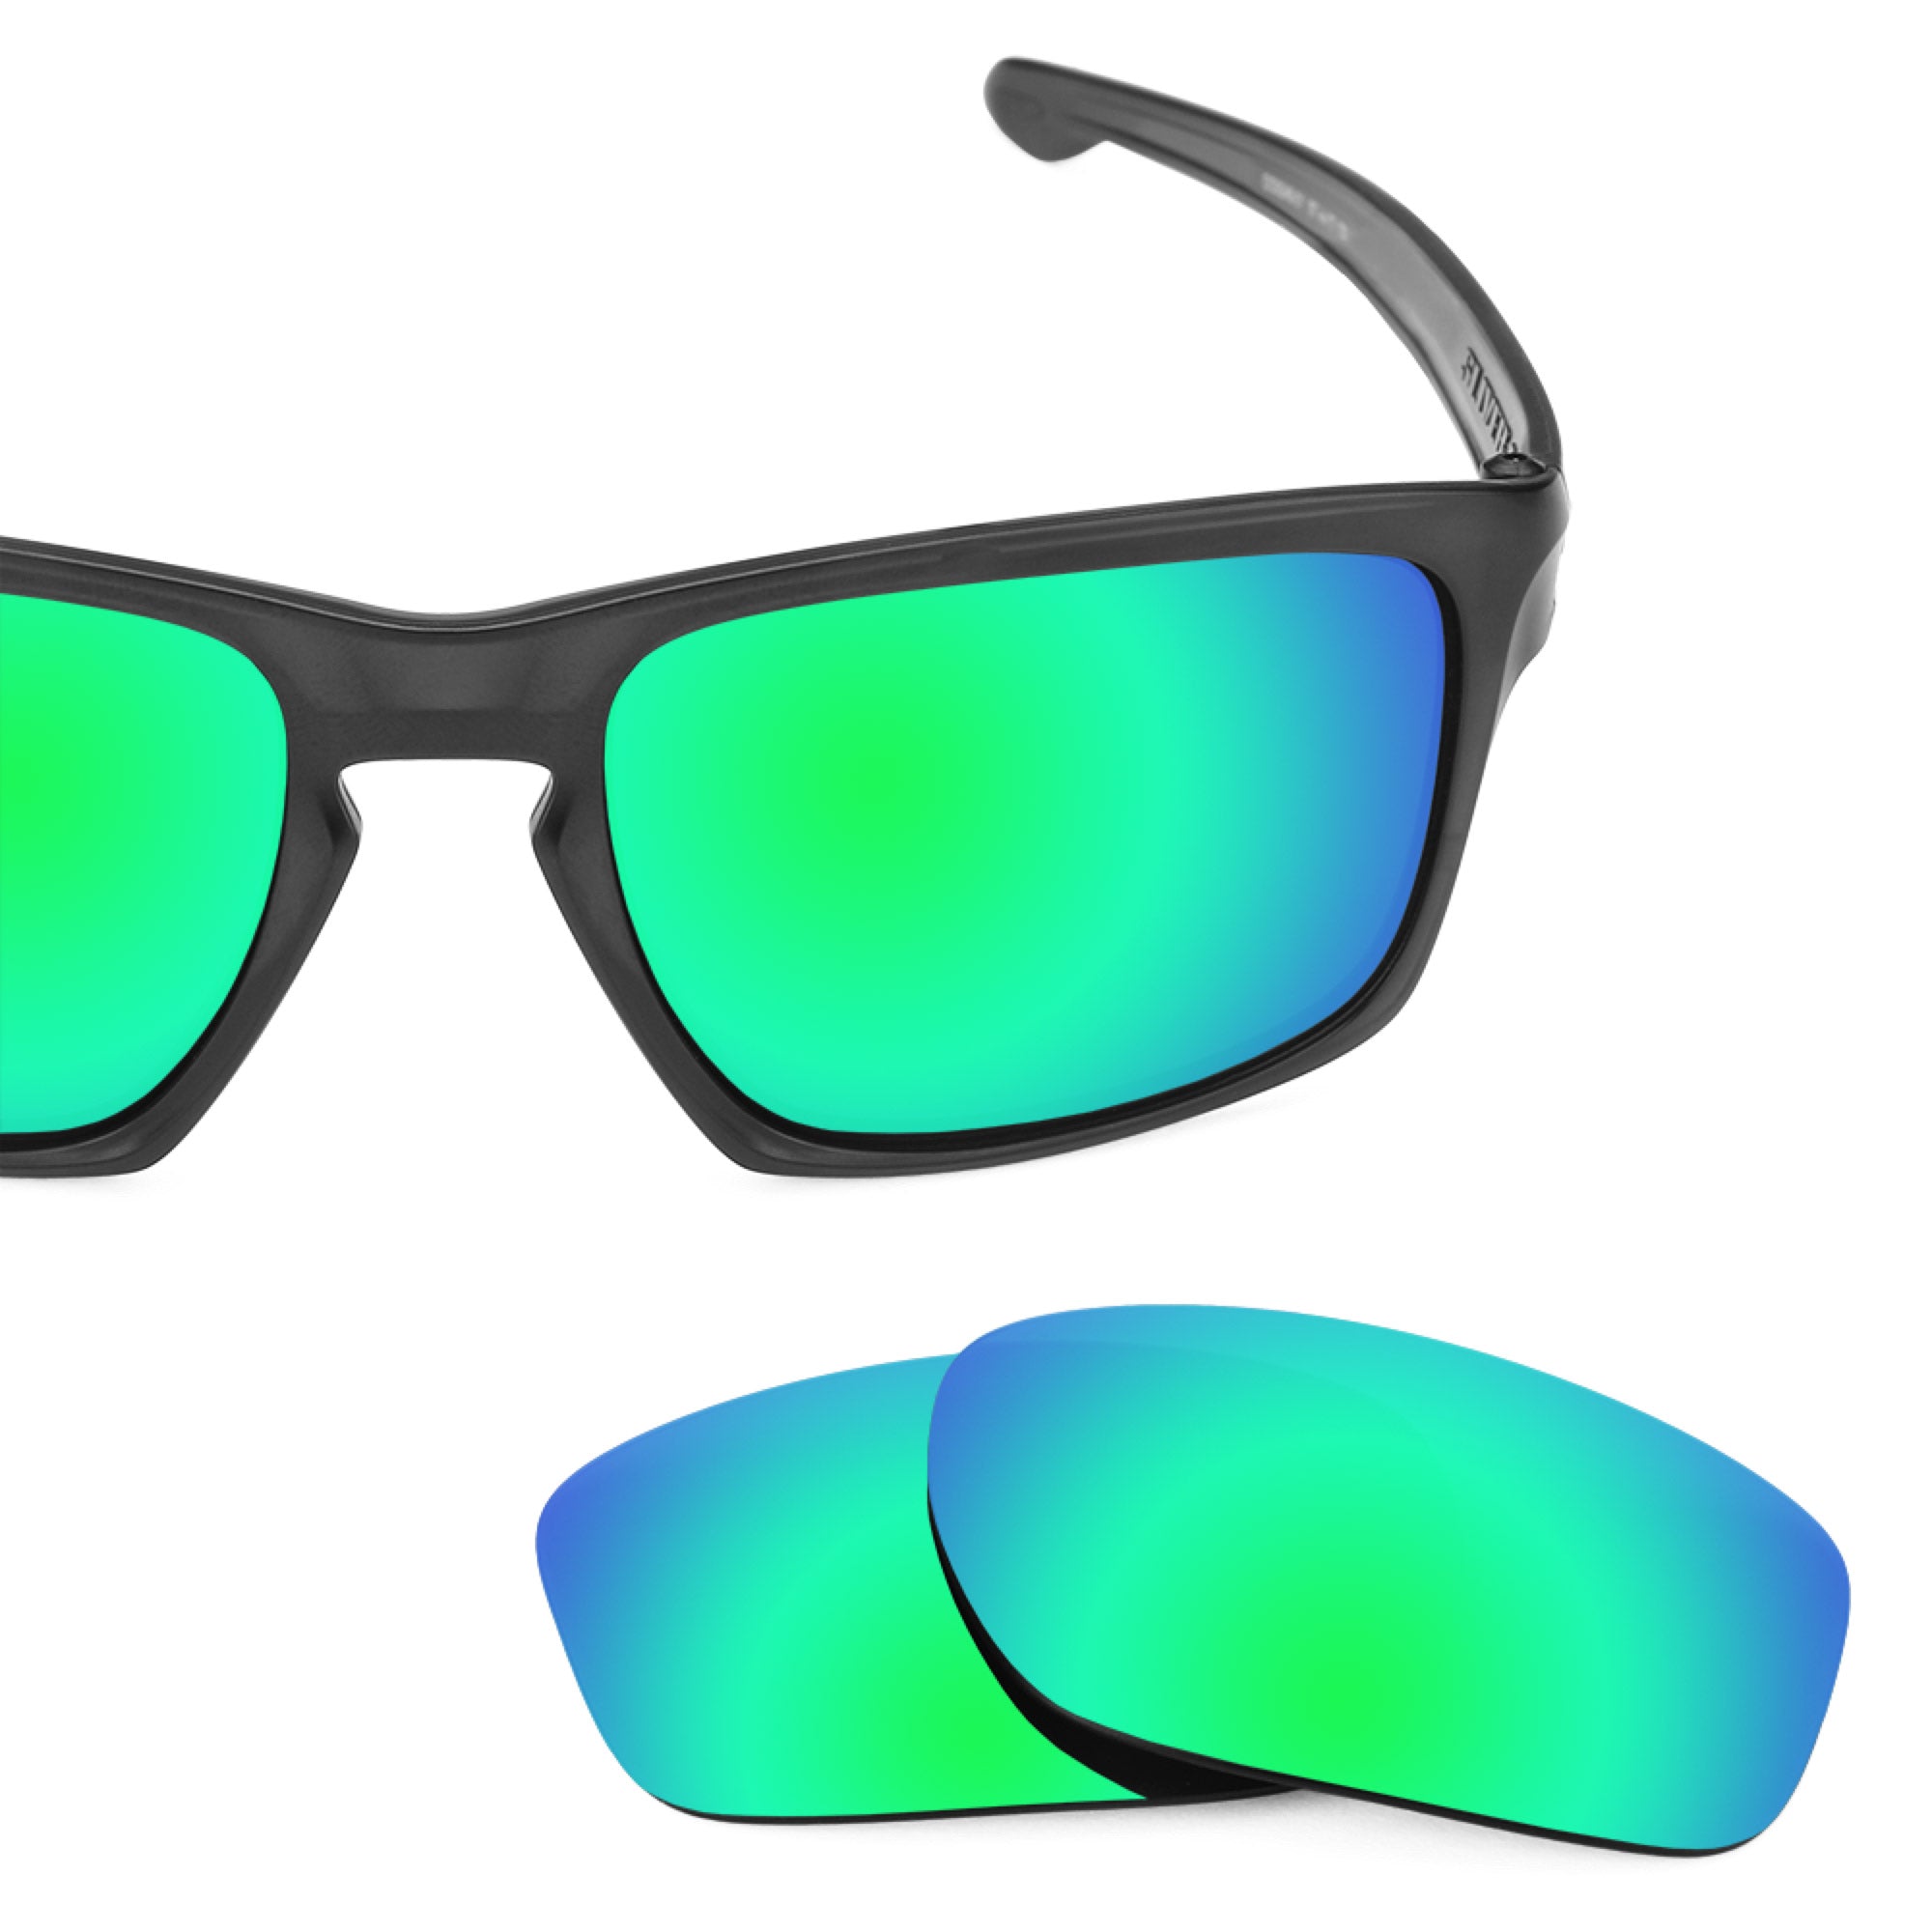 Revant replacement lenses for Oakley Sliver Polarized Emerald Green